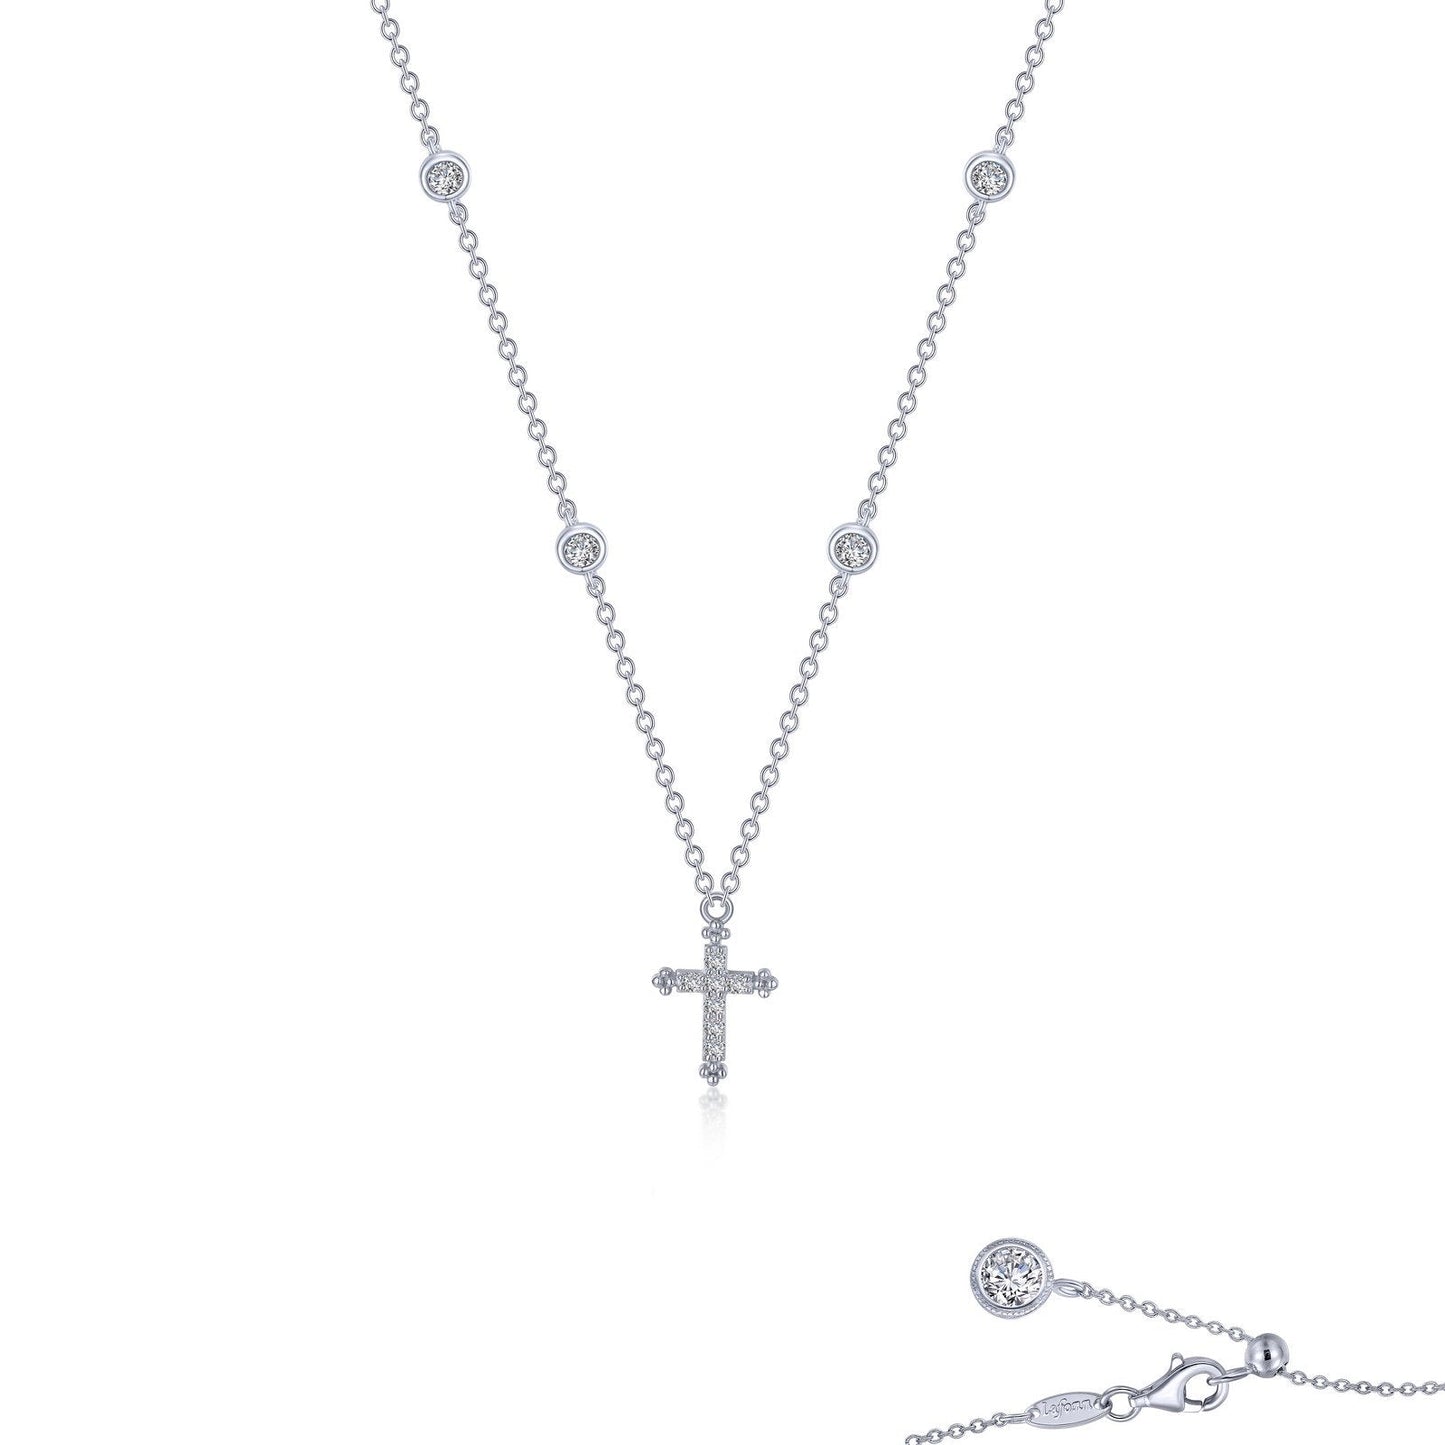 Lafonn 0.41 CTW Cross Necklace Simulated Diamond NECKLACES Platinum 0.41 CTS Approx. 11.6mm (H) x 8.7mm (W)